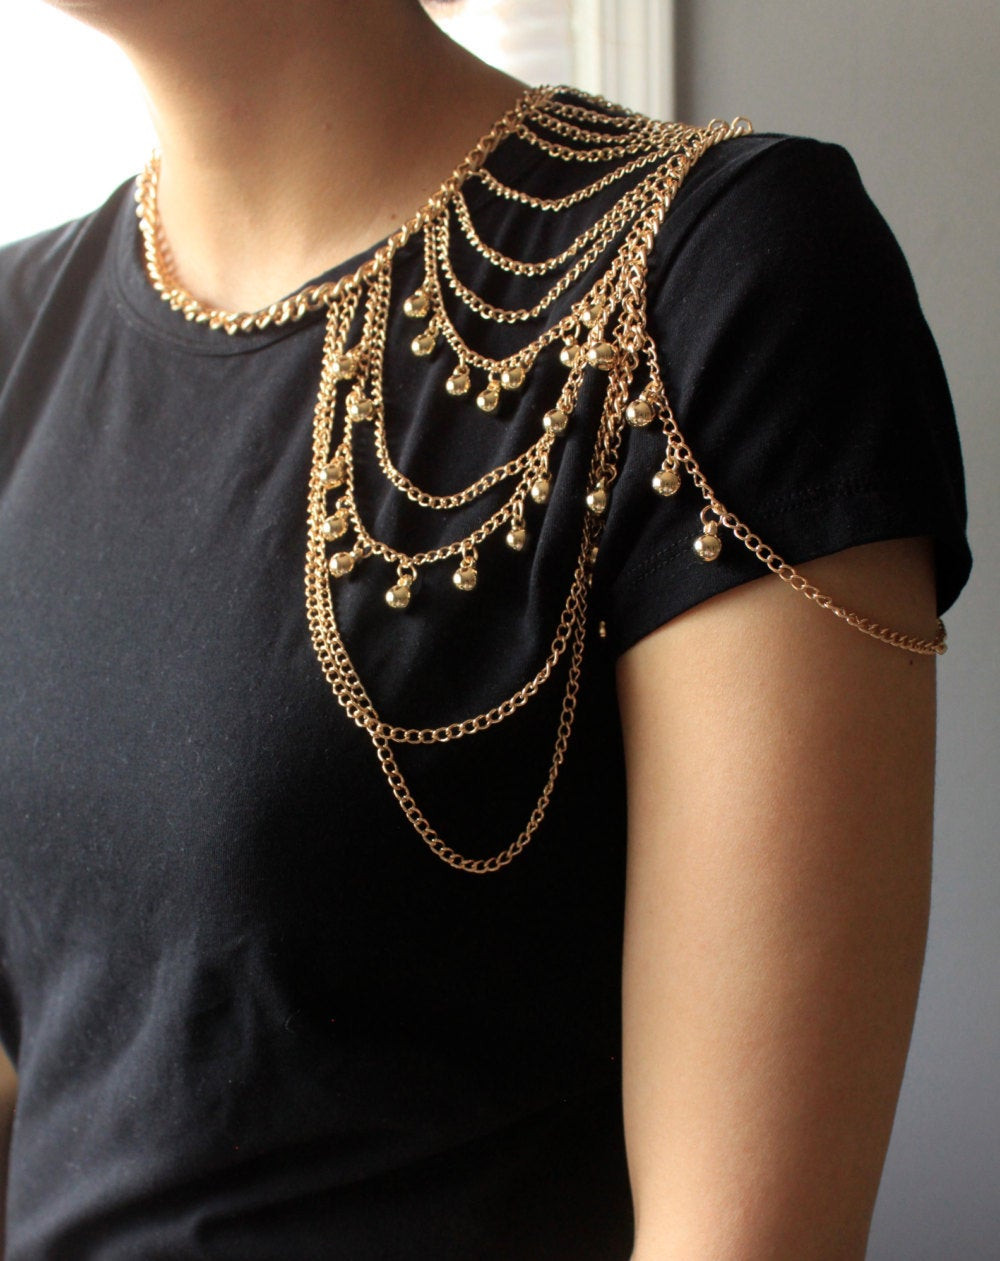 Body Chain Necklace
 Shoulder Jewelry Gold Shoulder Chain Body by SusVintage on